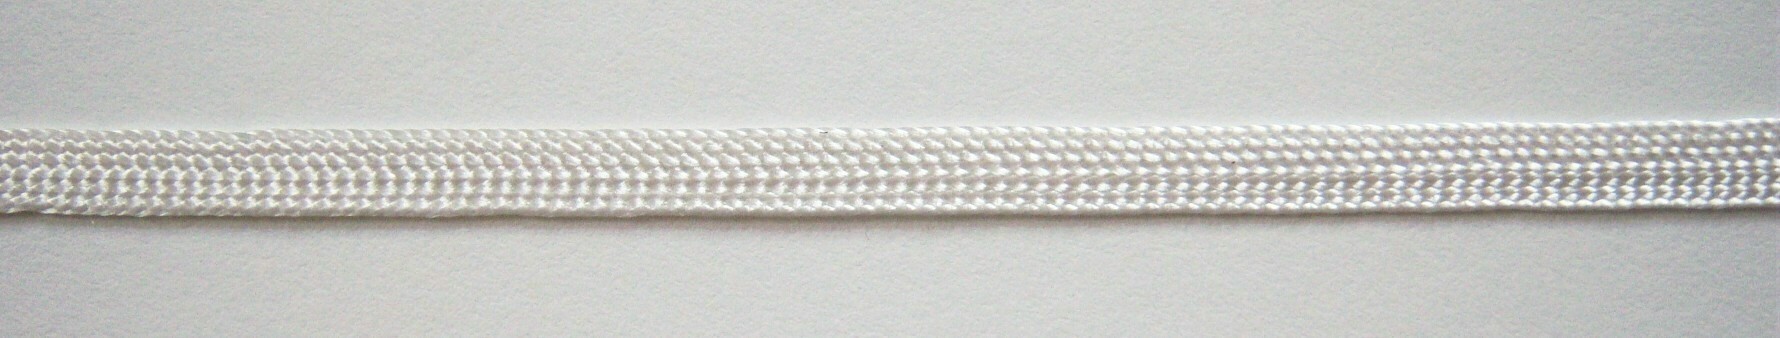 Natural White 3/16" Middy Braid